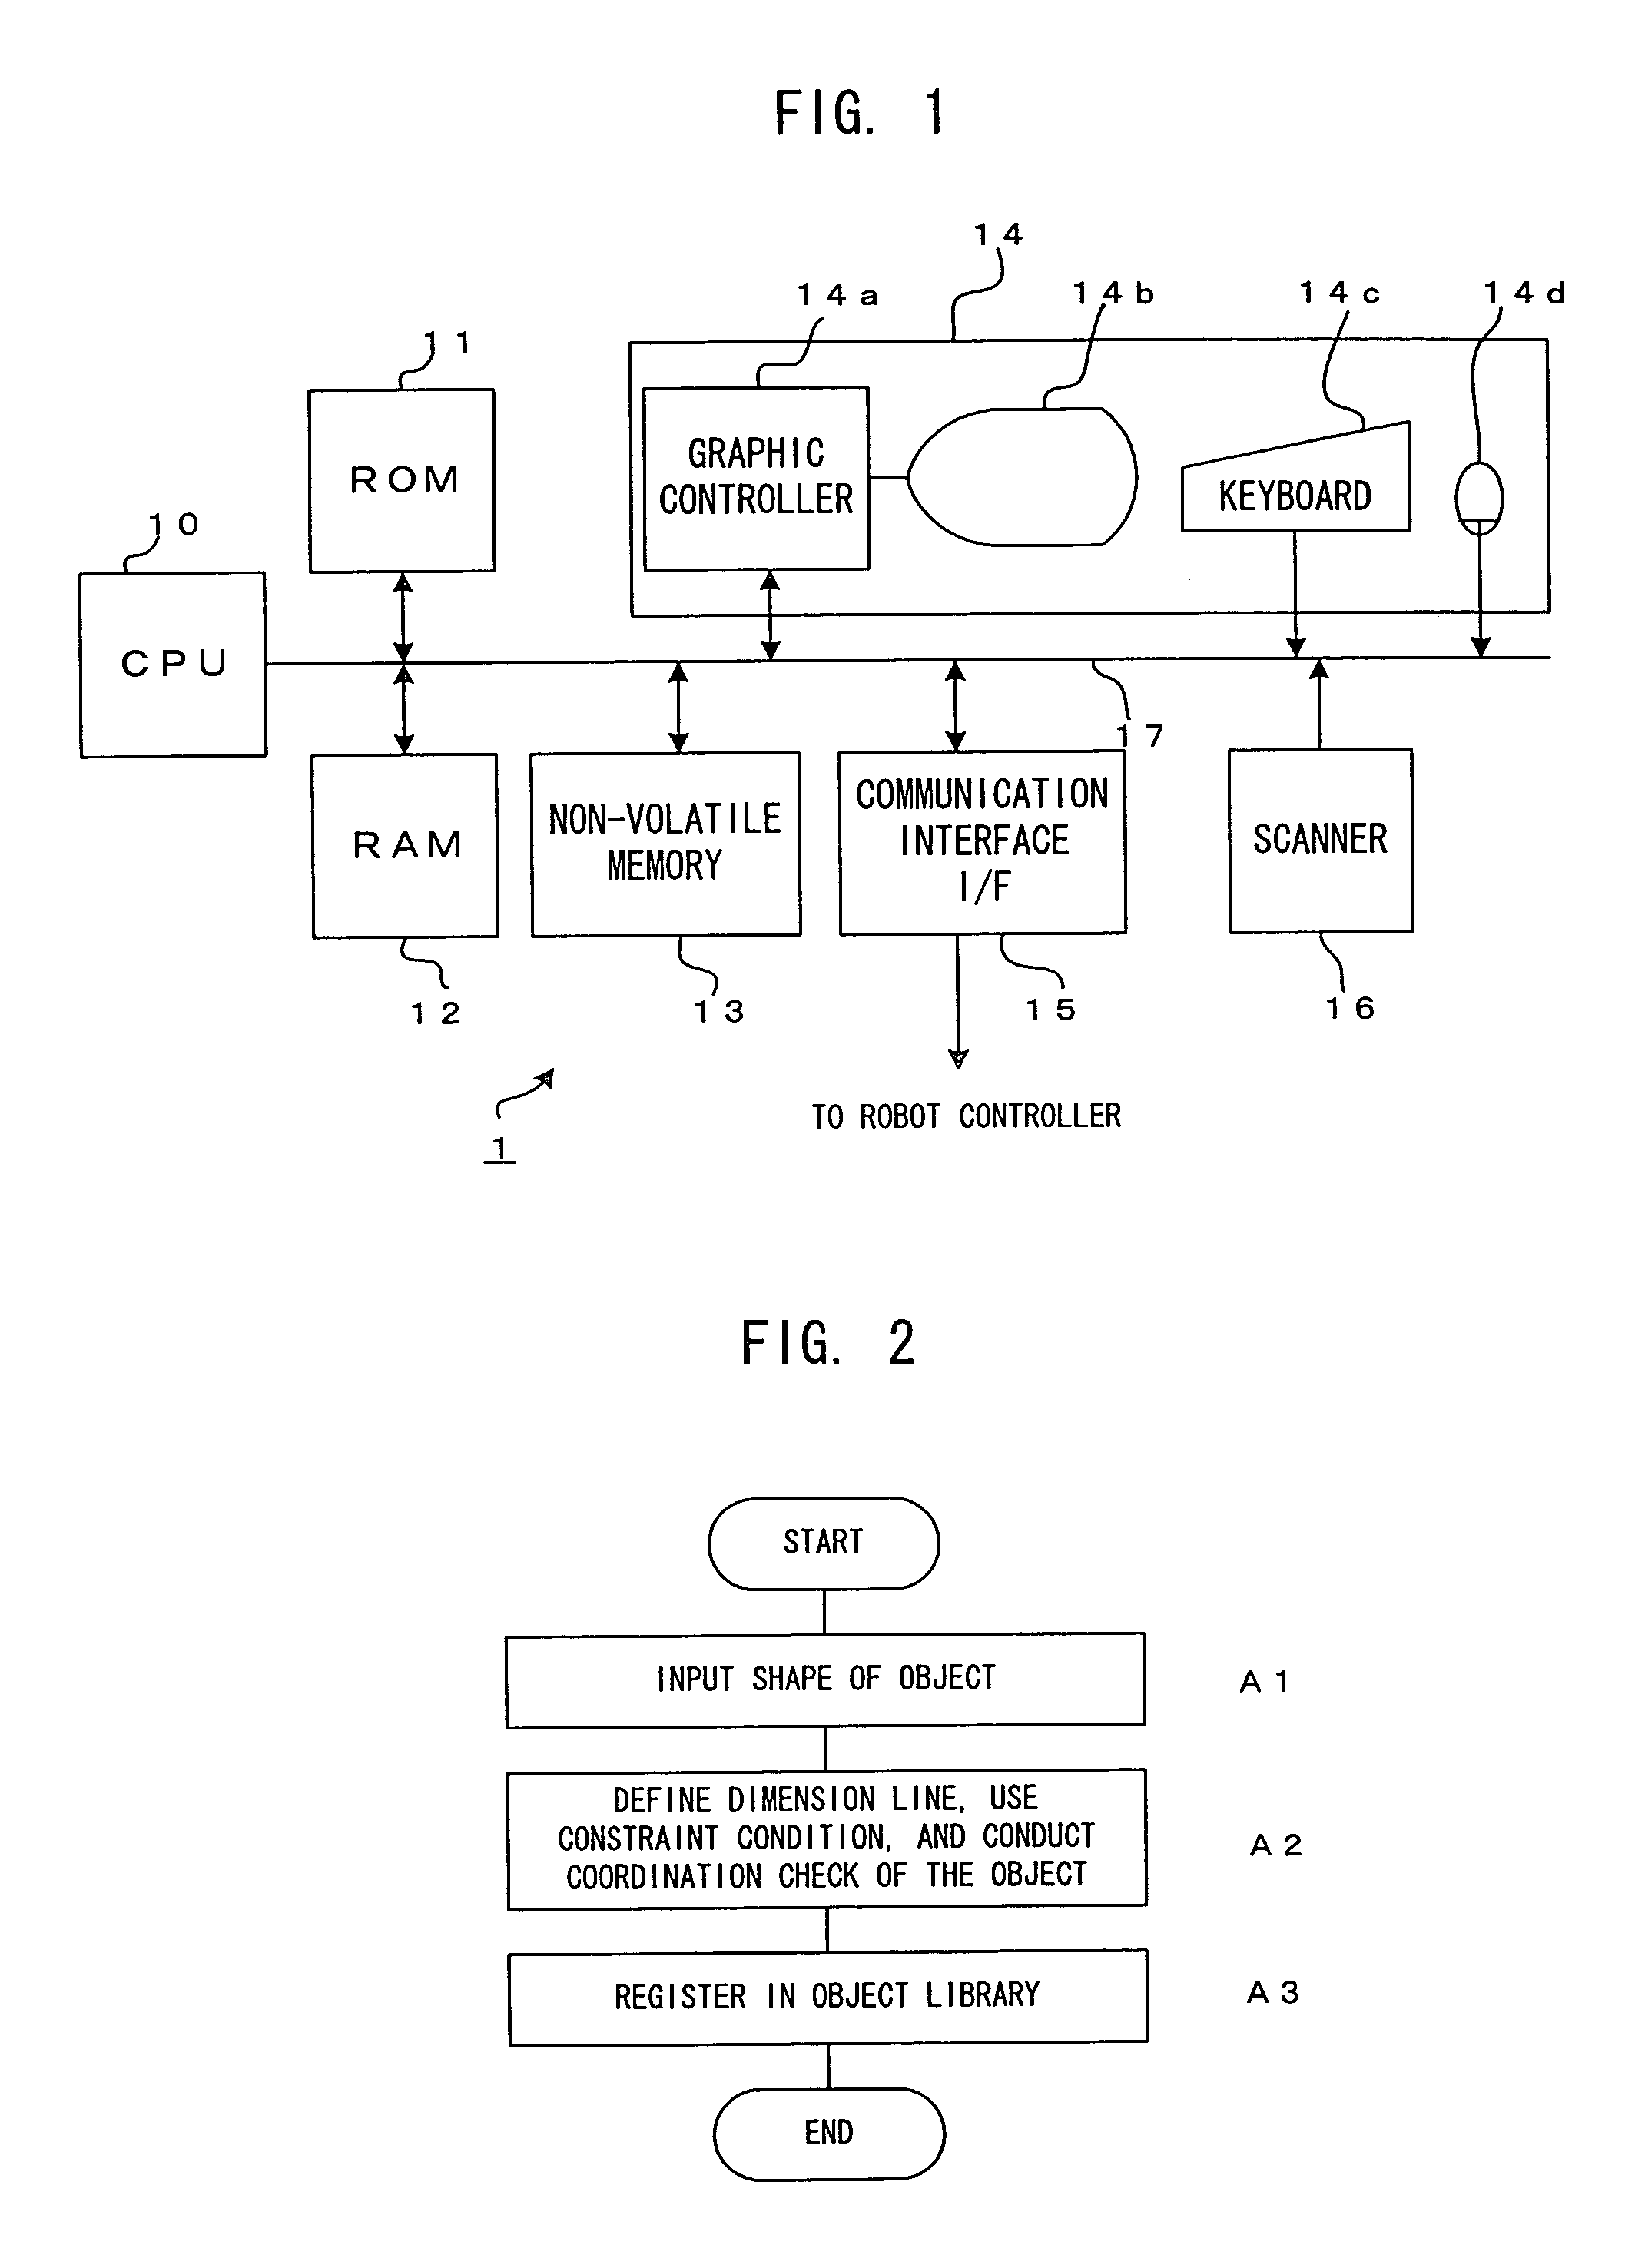 Graphic display apparatus for robot system